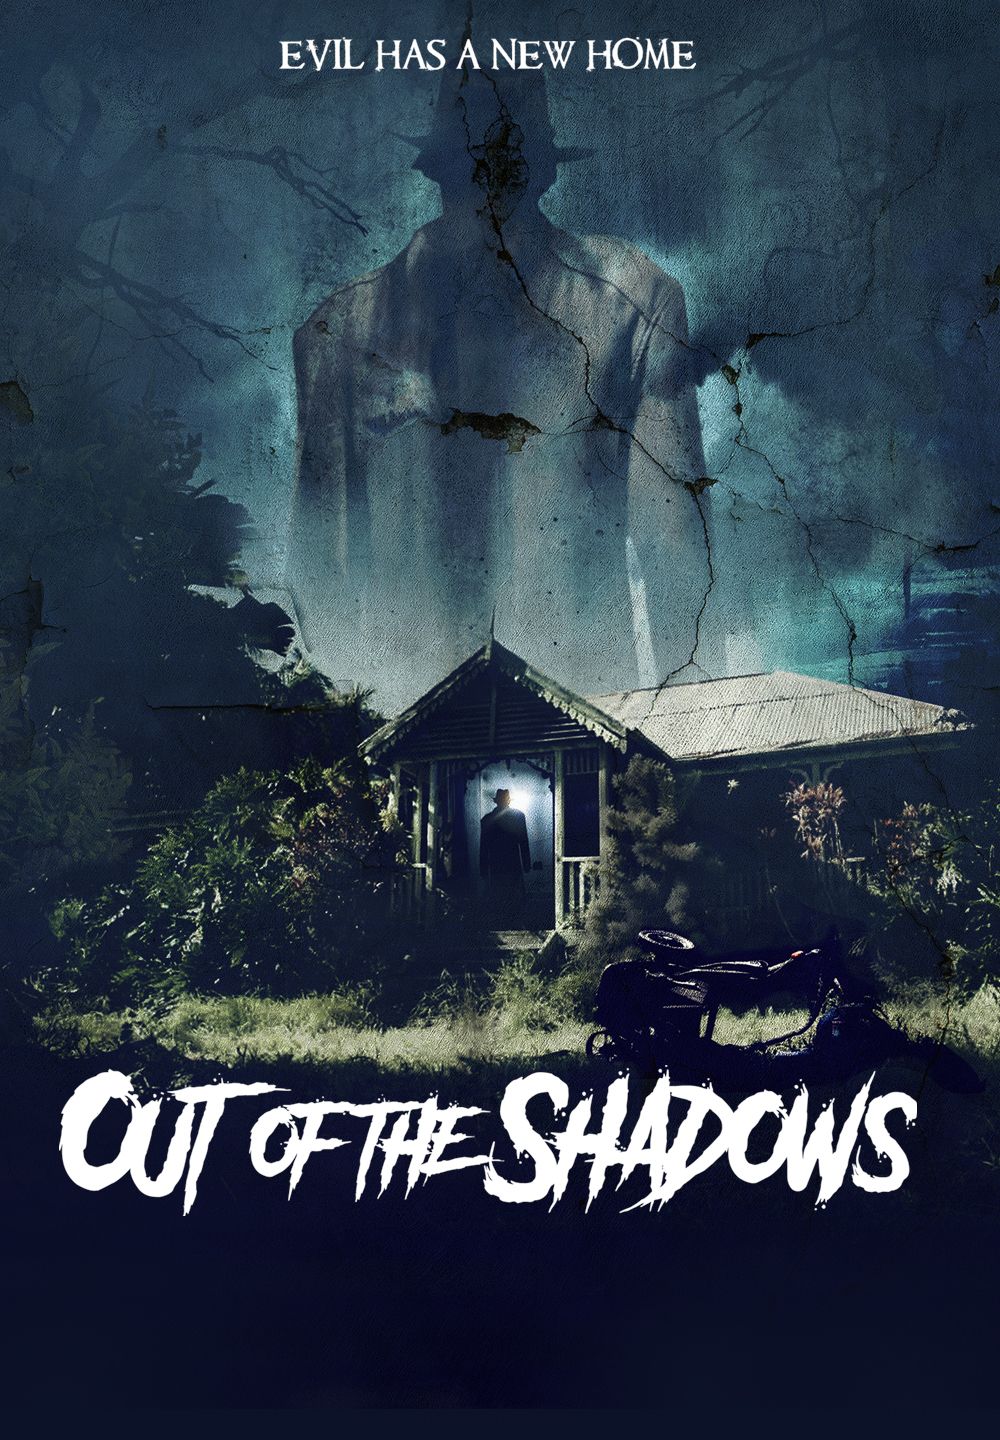 Out of the Shadows (2017)